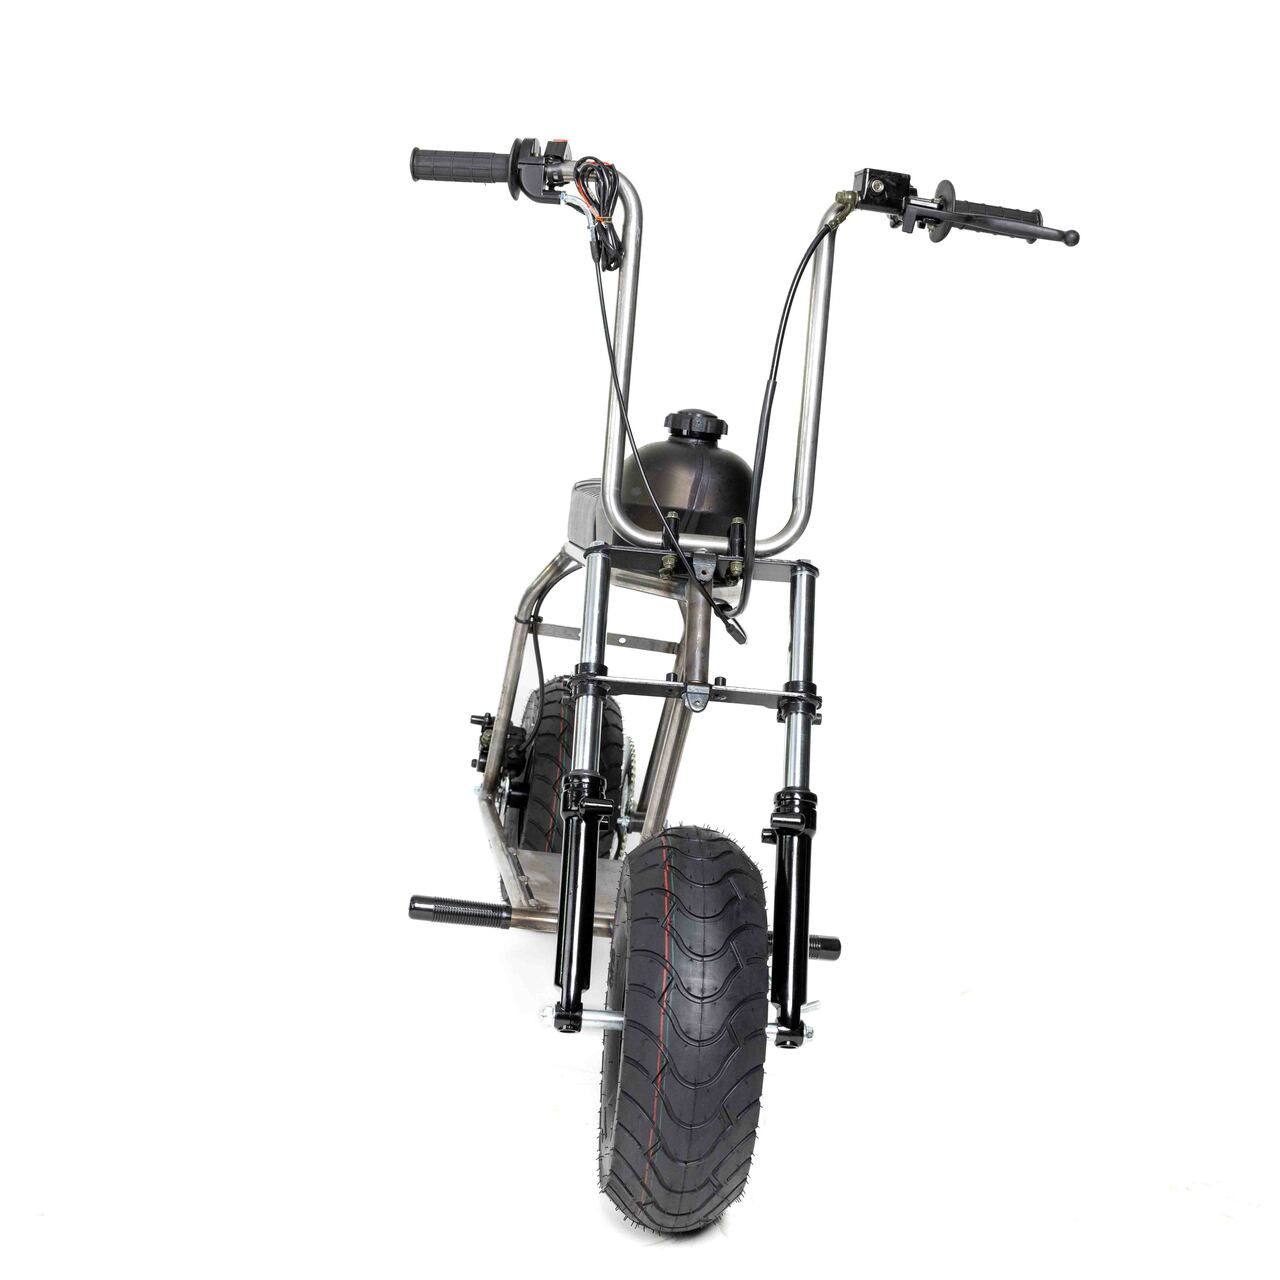 Rascal Mini Bike Roller Kit (RASCALMBROLLERKIT) with 15" Street Tires and Telescopic Front Suspension